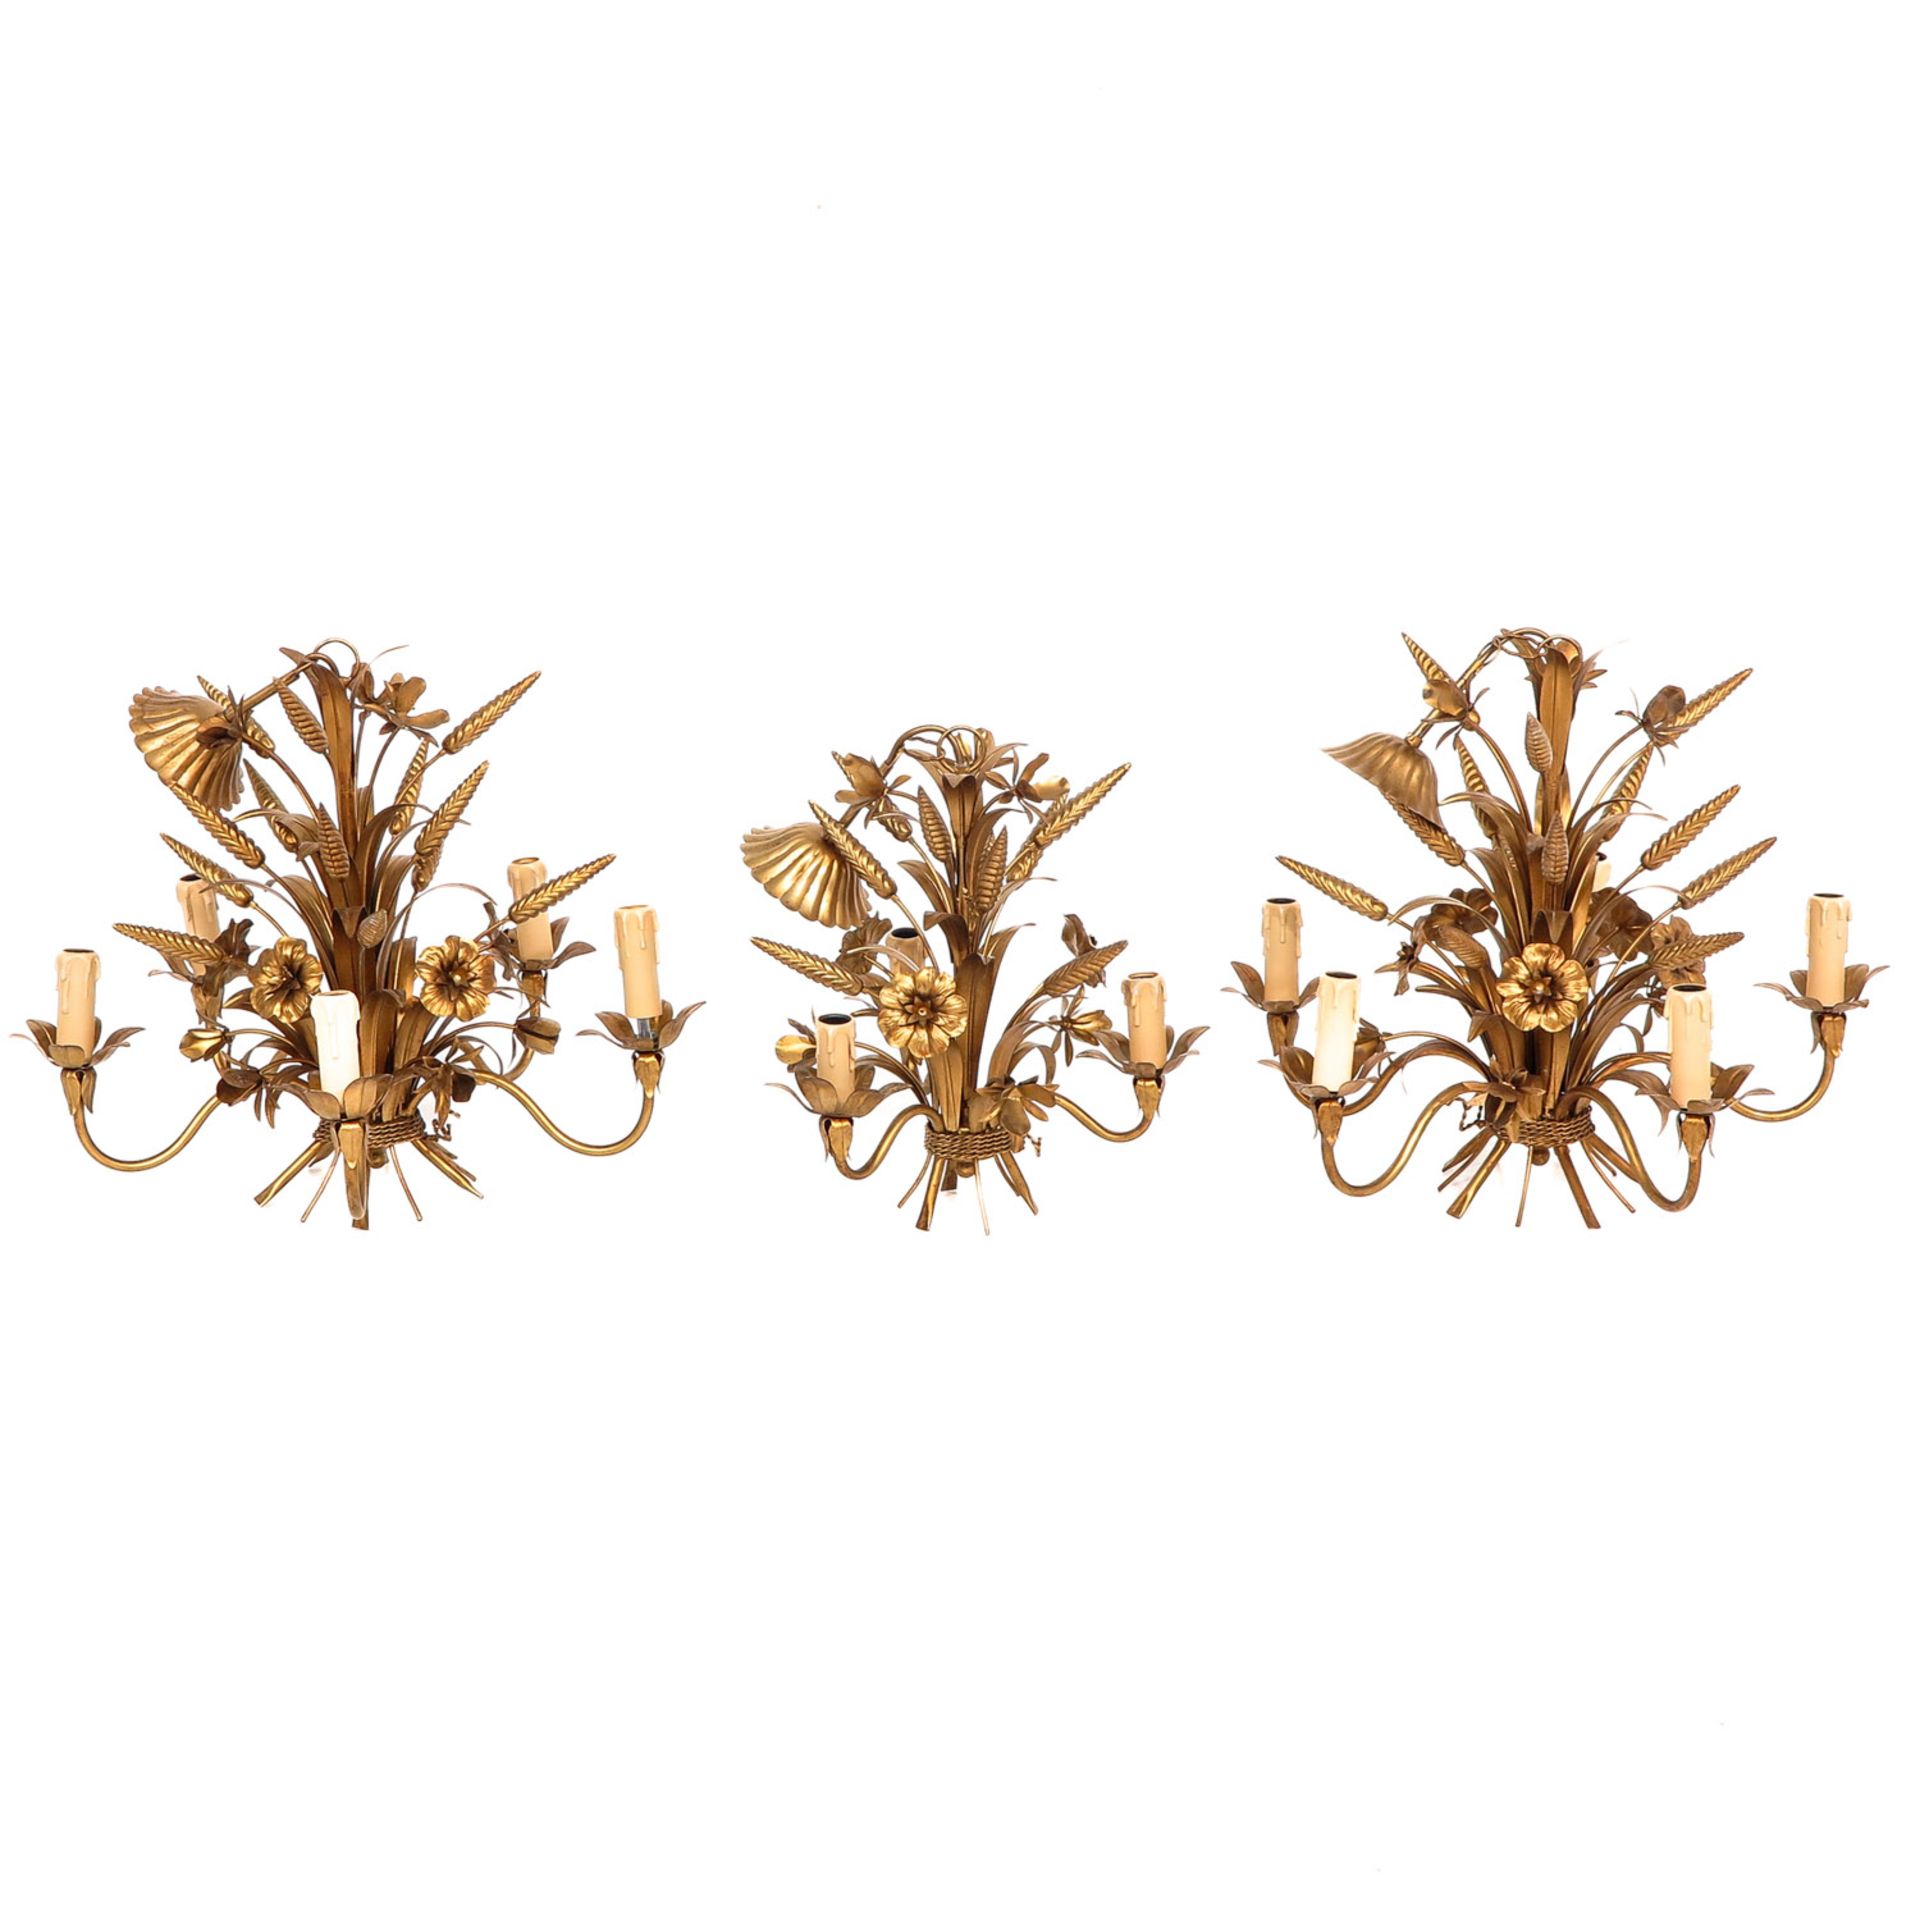 A Collection of 3 Wheat Chandeliers - Image 4 of 9